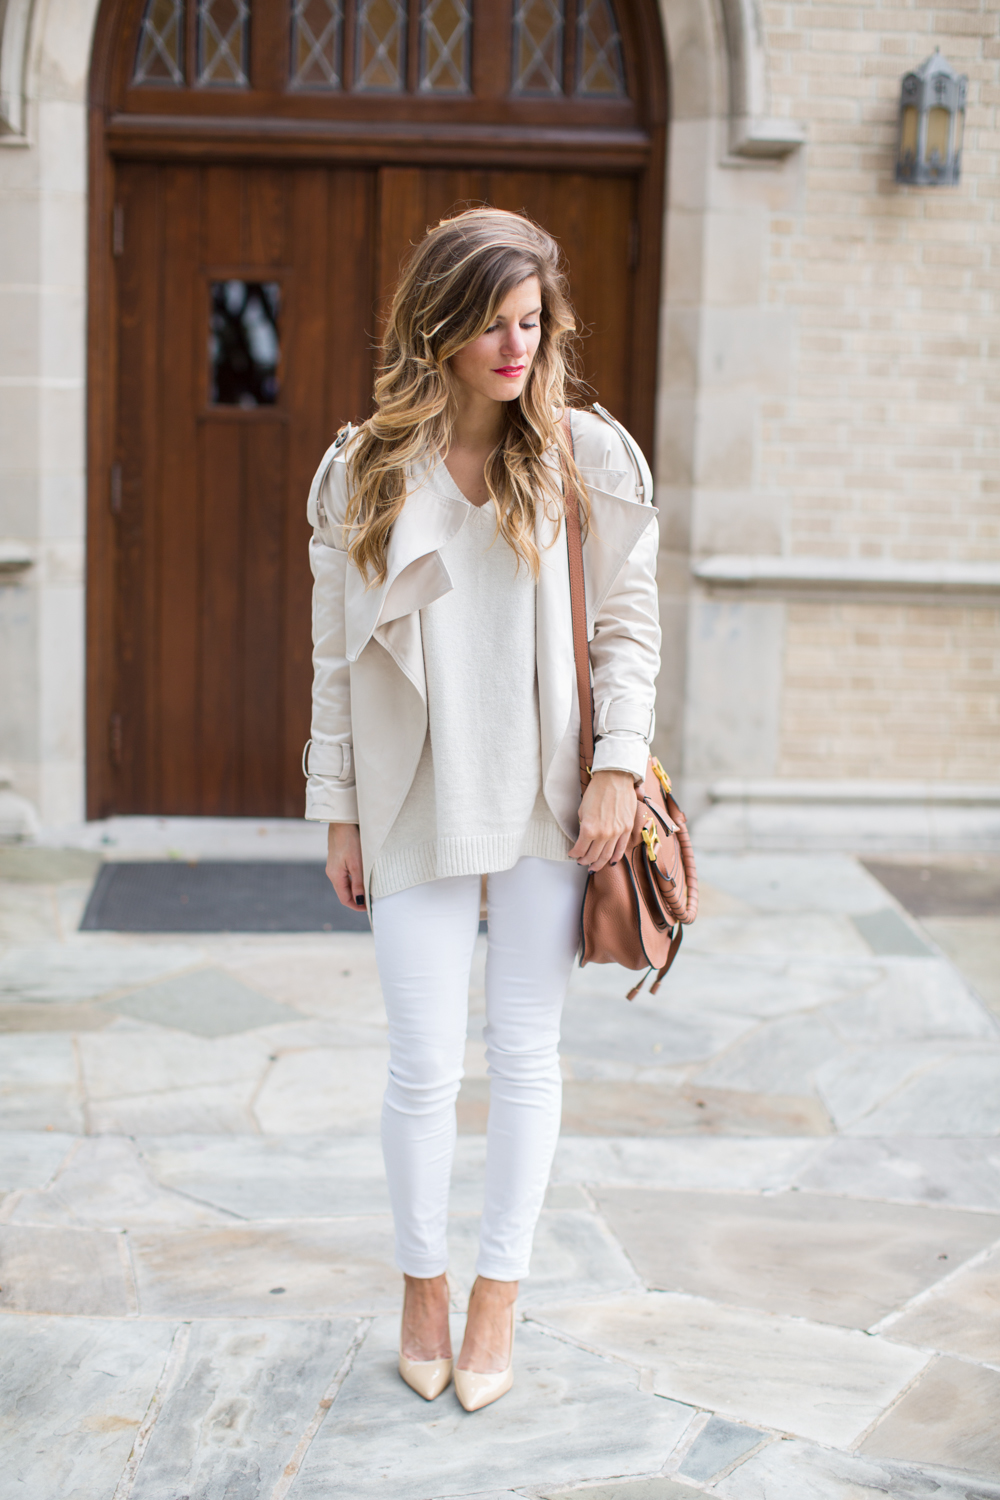 https://www.brightontheday.com/wp-content/uploads/2015/11/Winter-White-Look-with-white-jeans-cream-sweater-chloe-bag-nude-patent-pumps-85.jpg